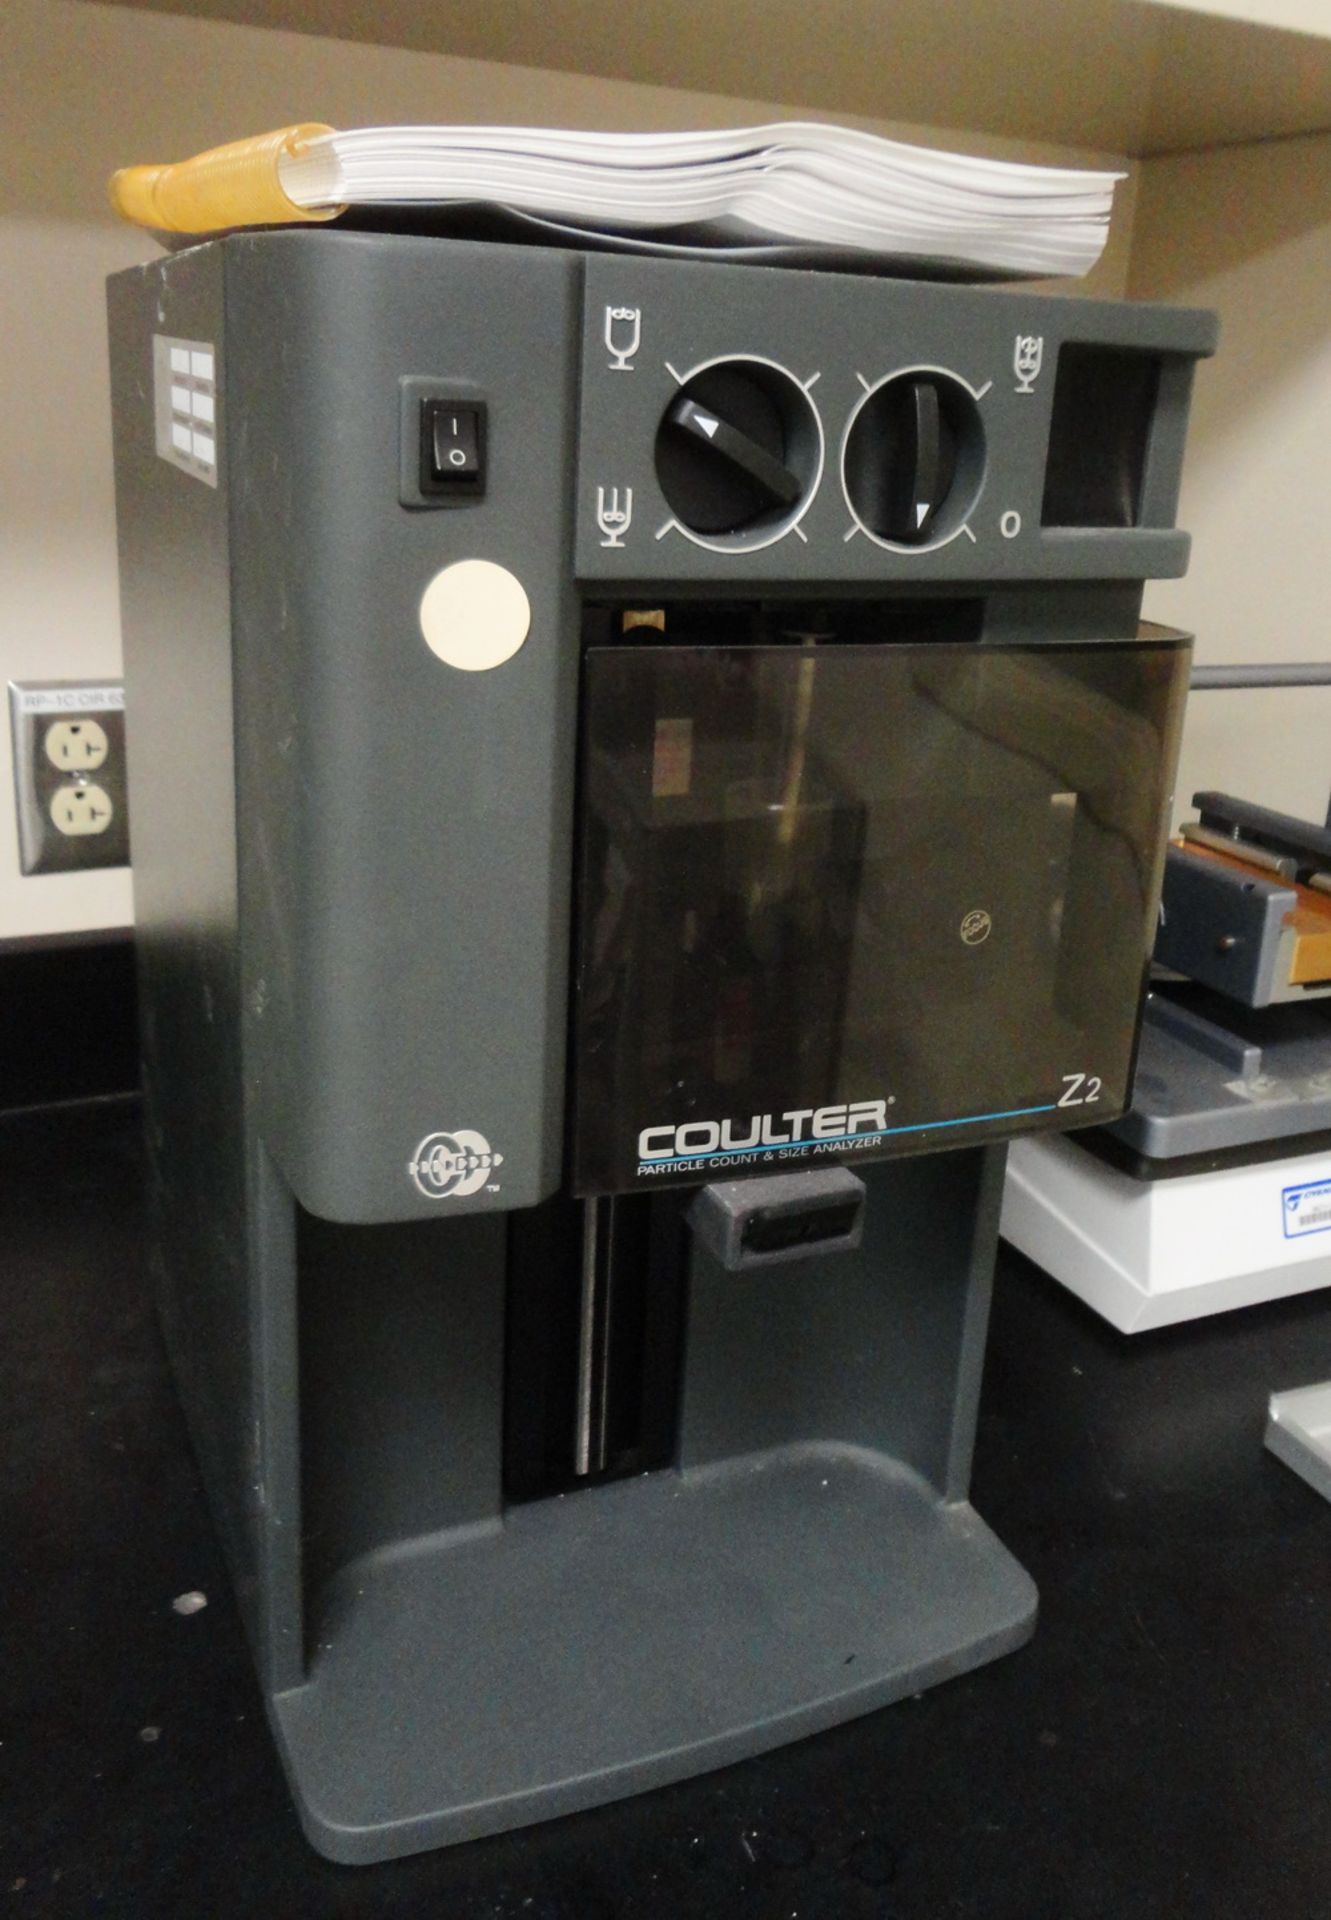 Coulter Z2 Particle Counter